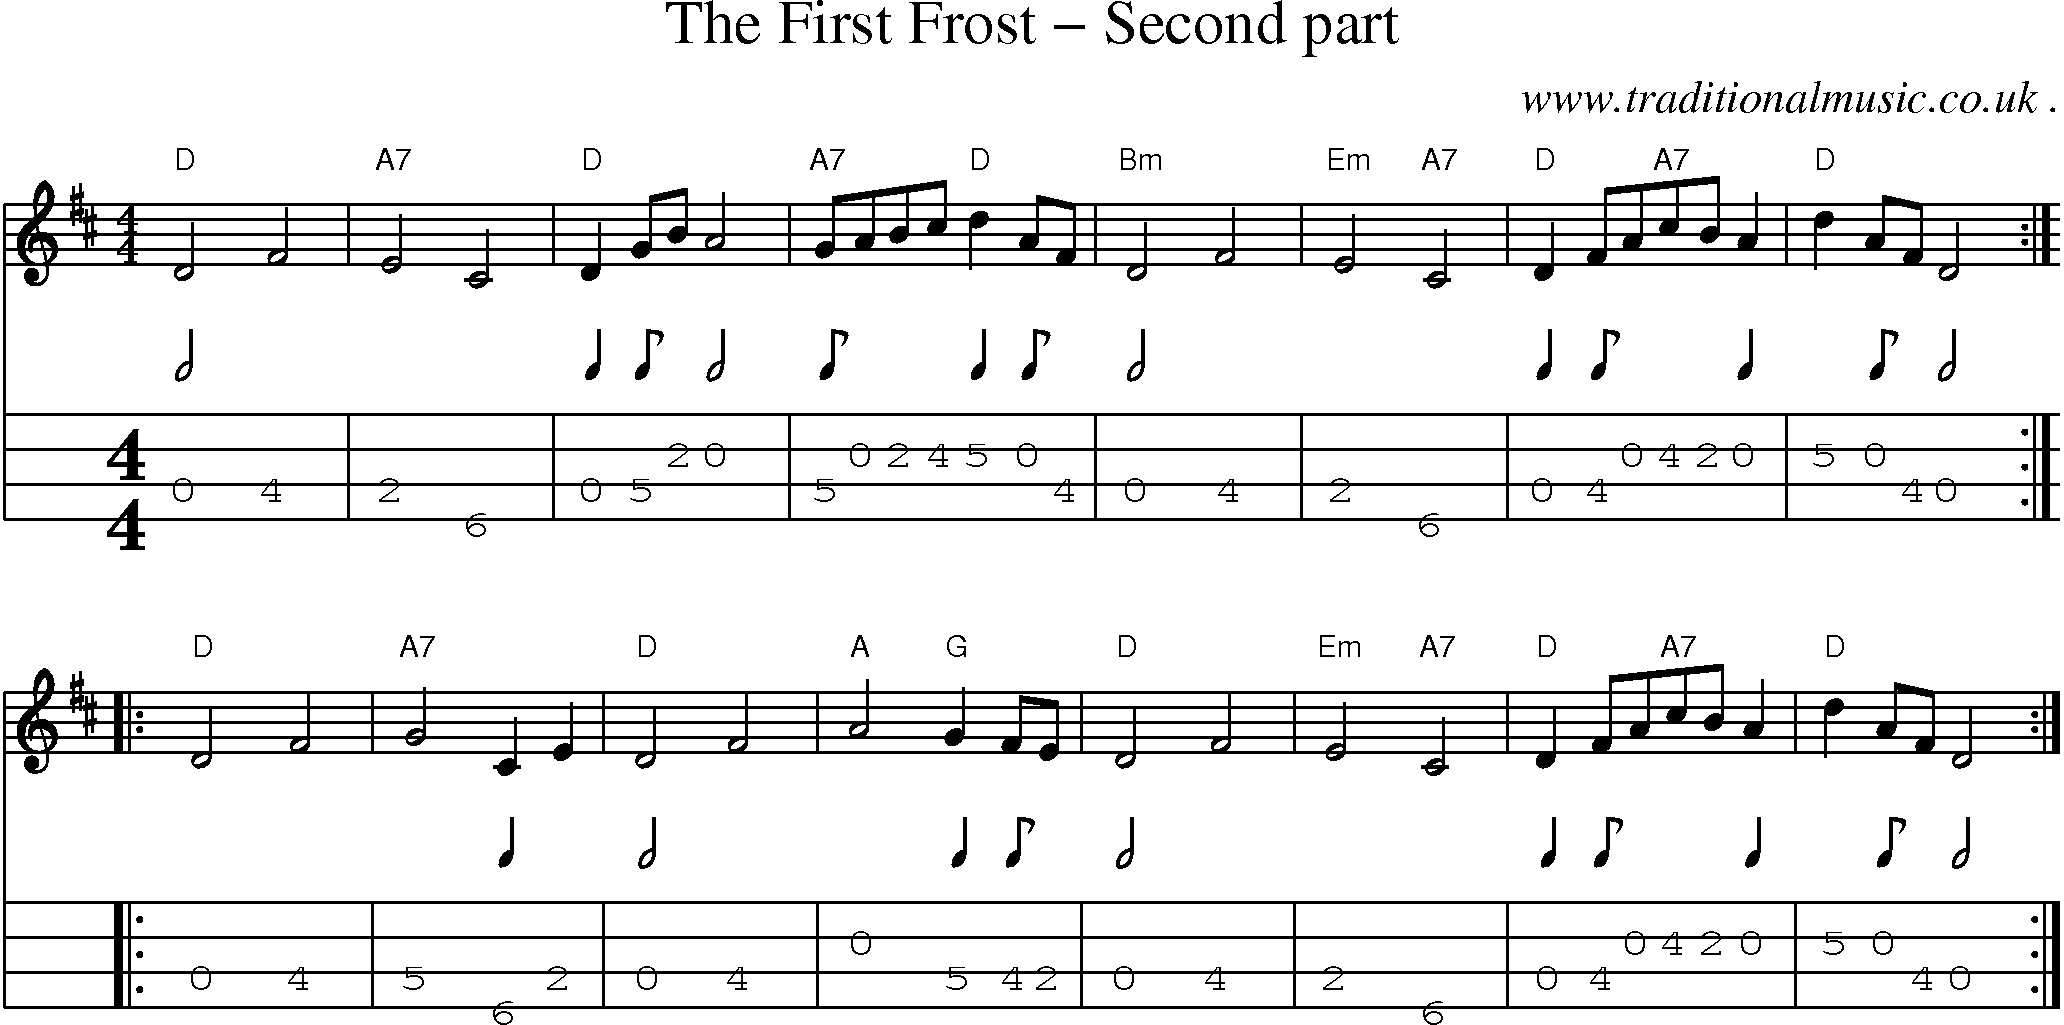 Sheet-Music and Mandolin Tabs for The First Frost Second Part